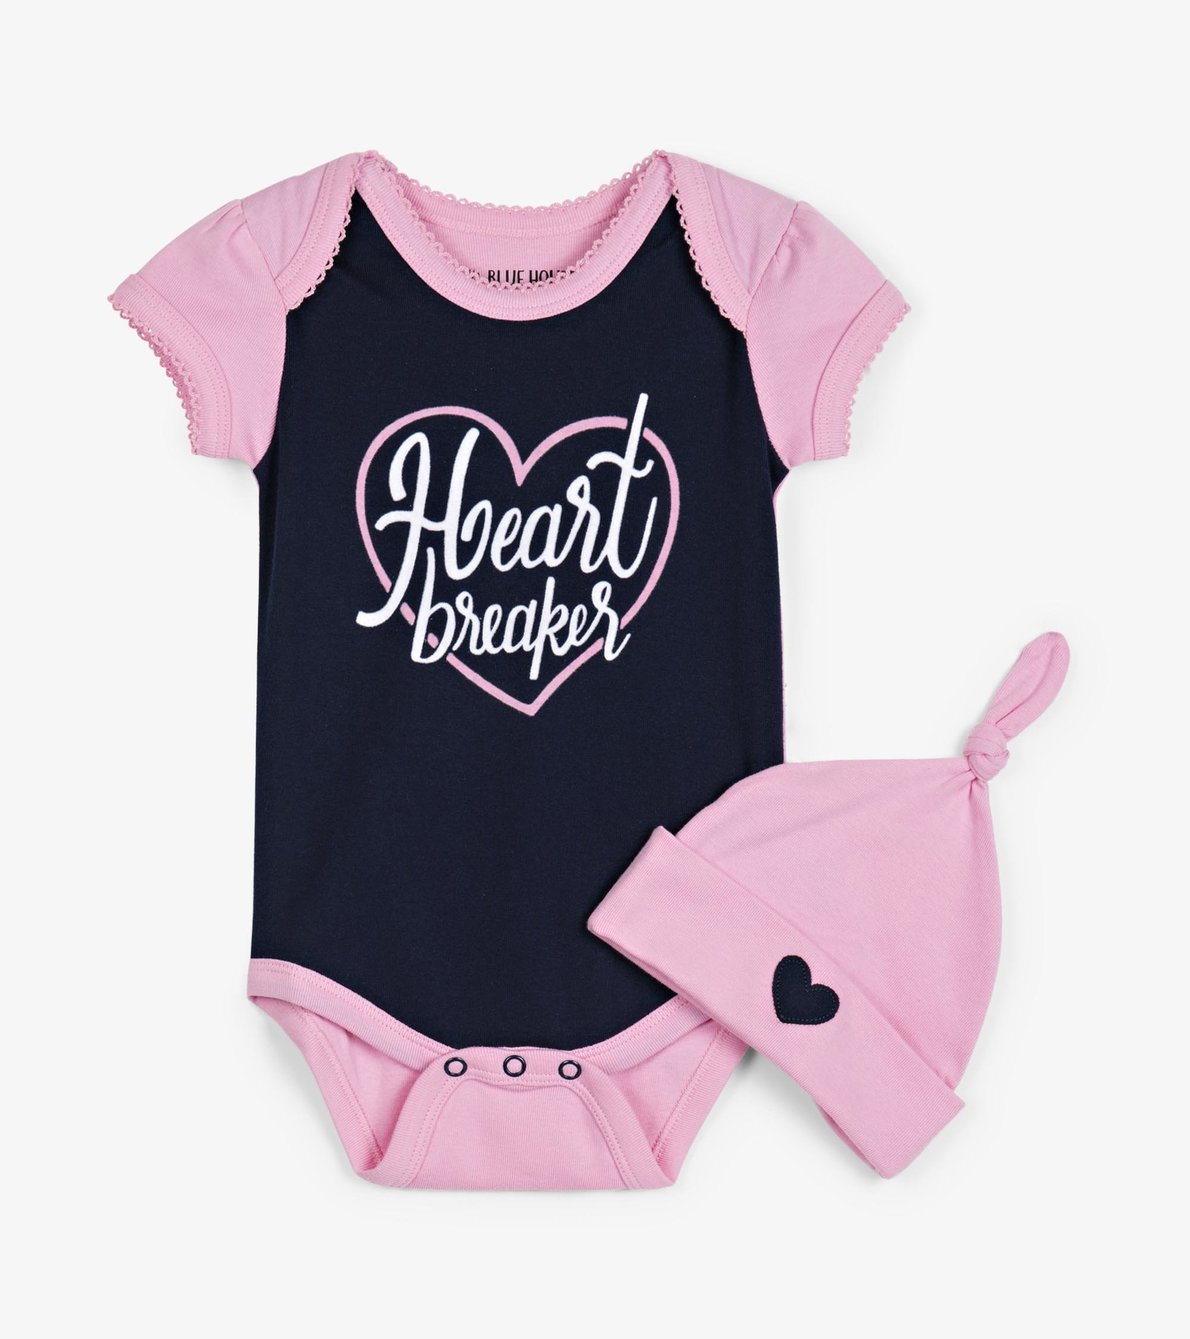 View larger image of Pink Heart Breaker Baby Bodysuit with Hat